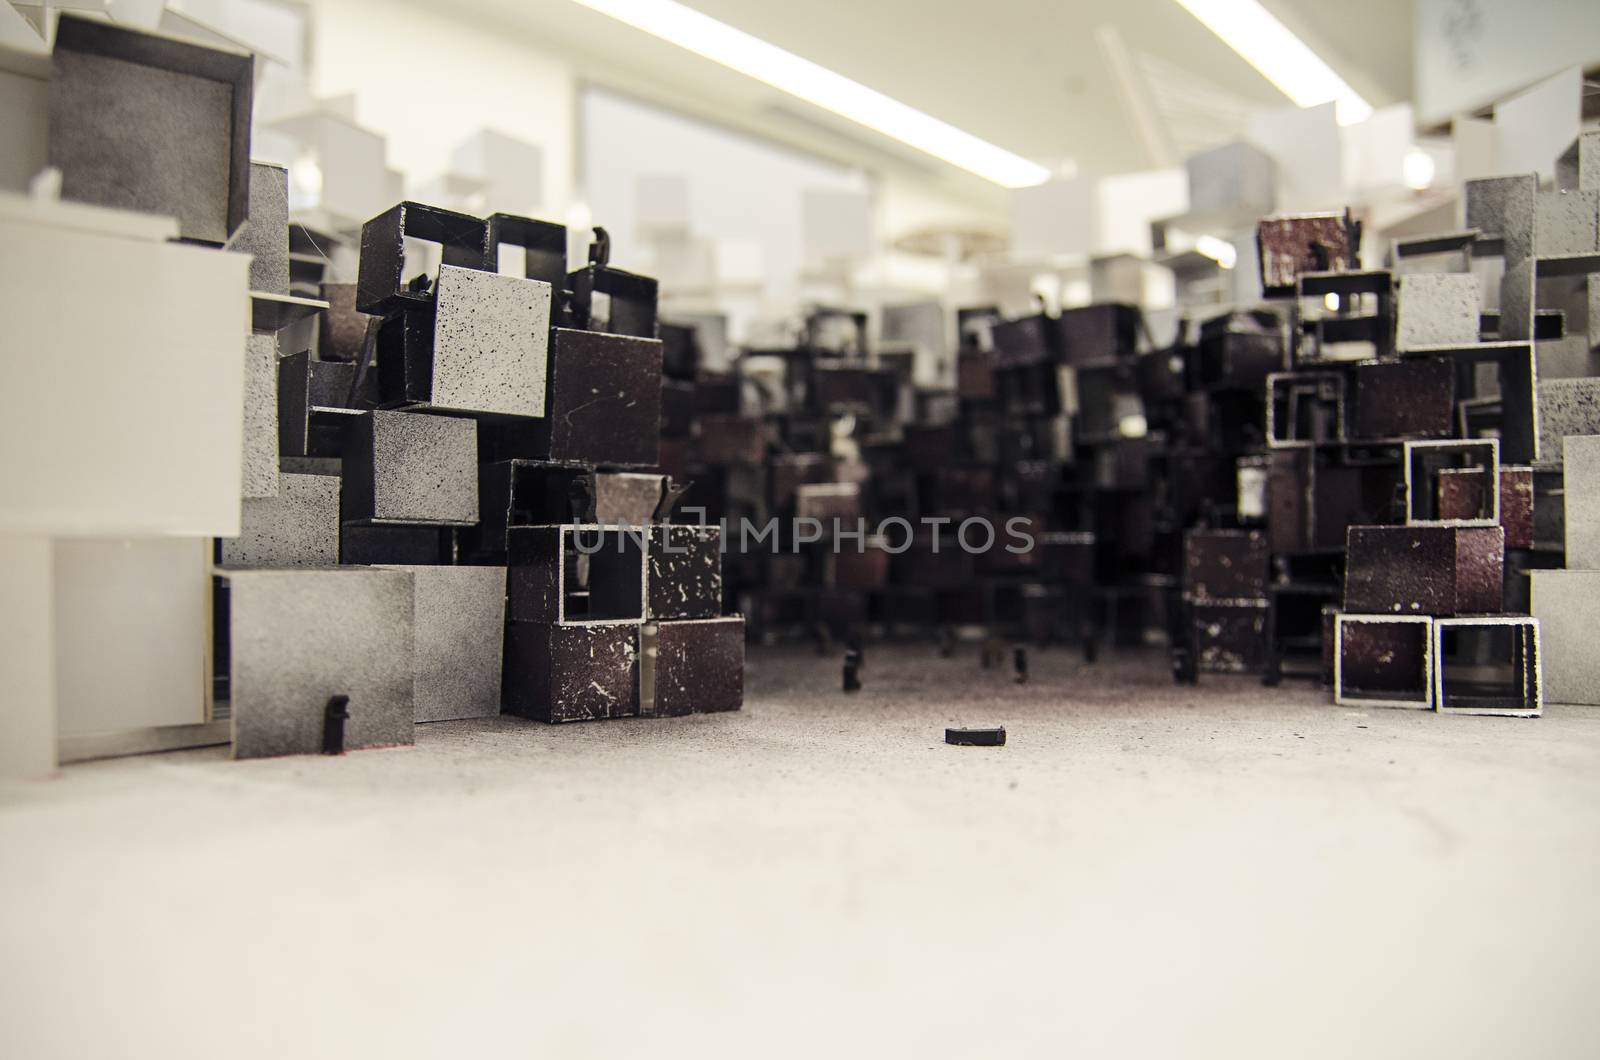 Abstract architectural model of city in China by Vanzyst